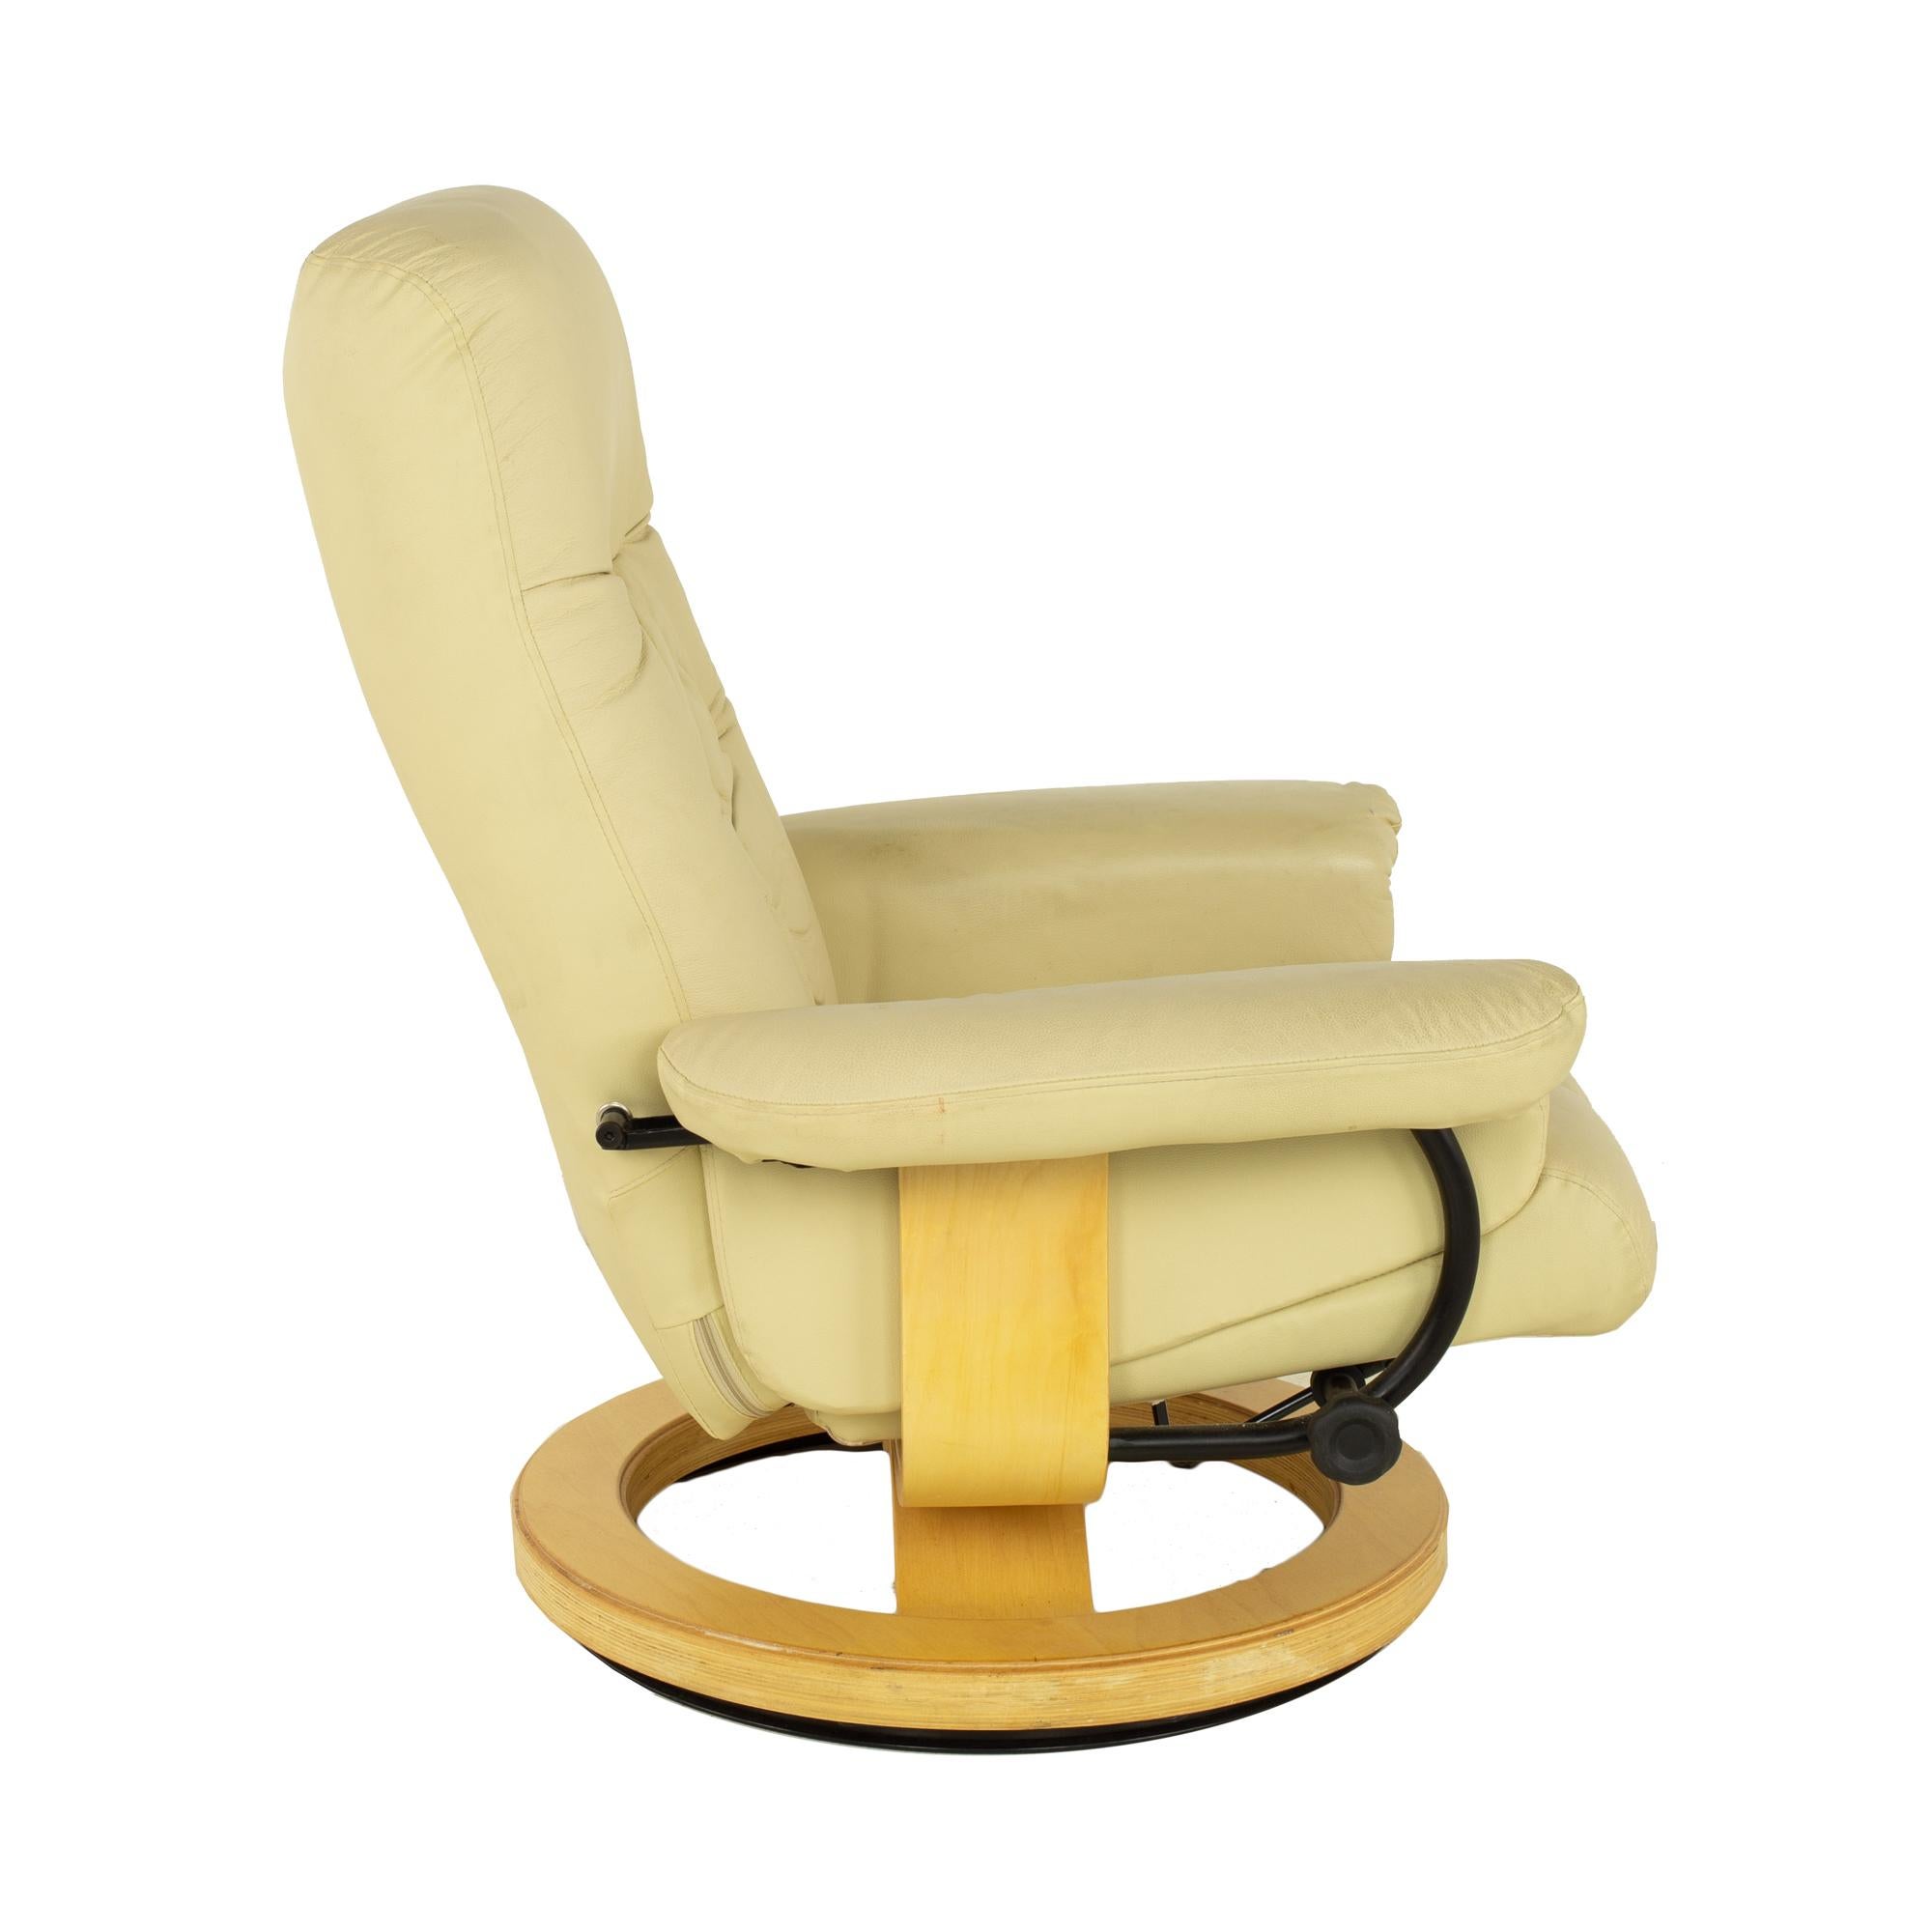 Late 20th Century Ekornes Stressless Style Mid Century Leather Lounge Chair and Ottoman